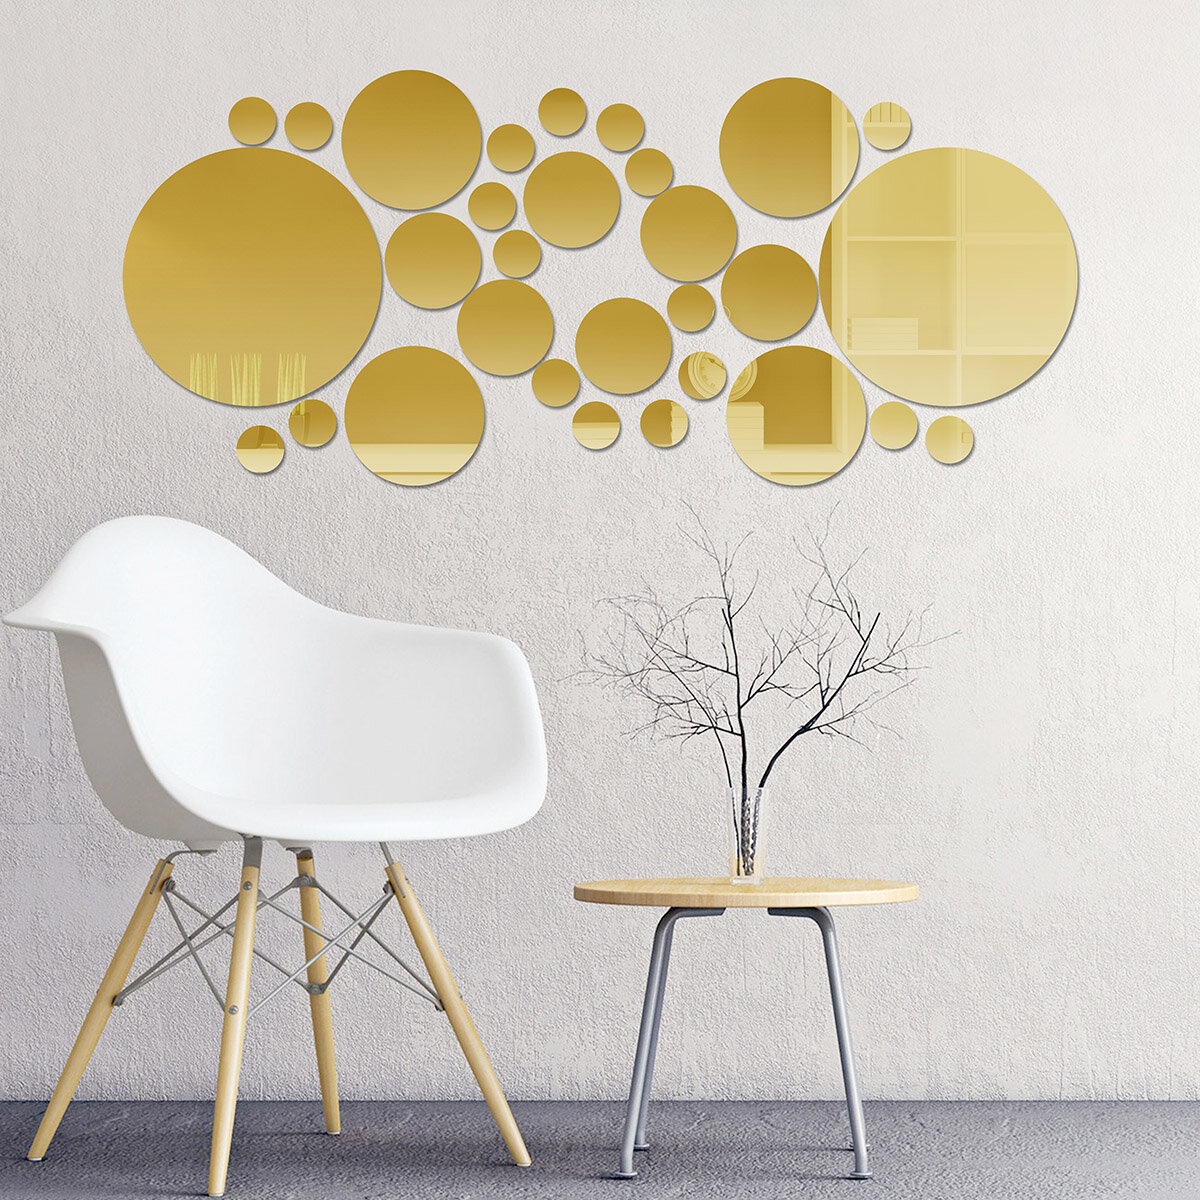 3D Home Mirror Wall Stickers Self Adhesive Removable Bedroom Office Art Decal Household Wall Ornamen